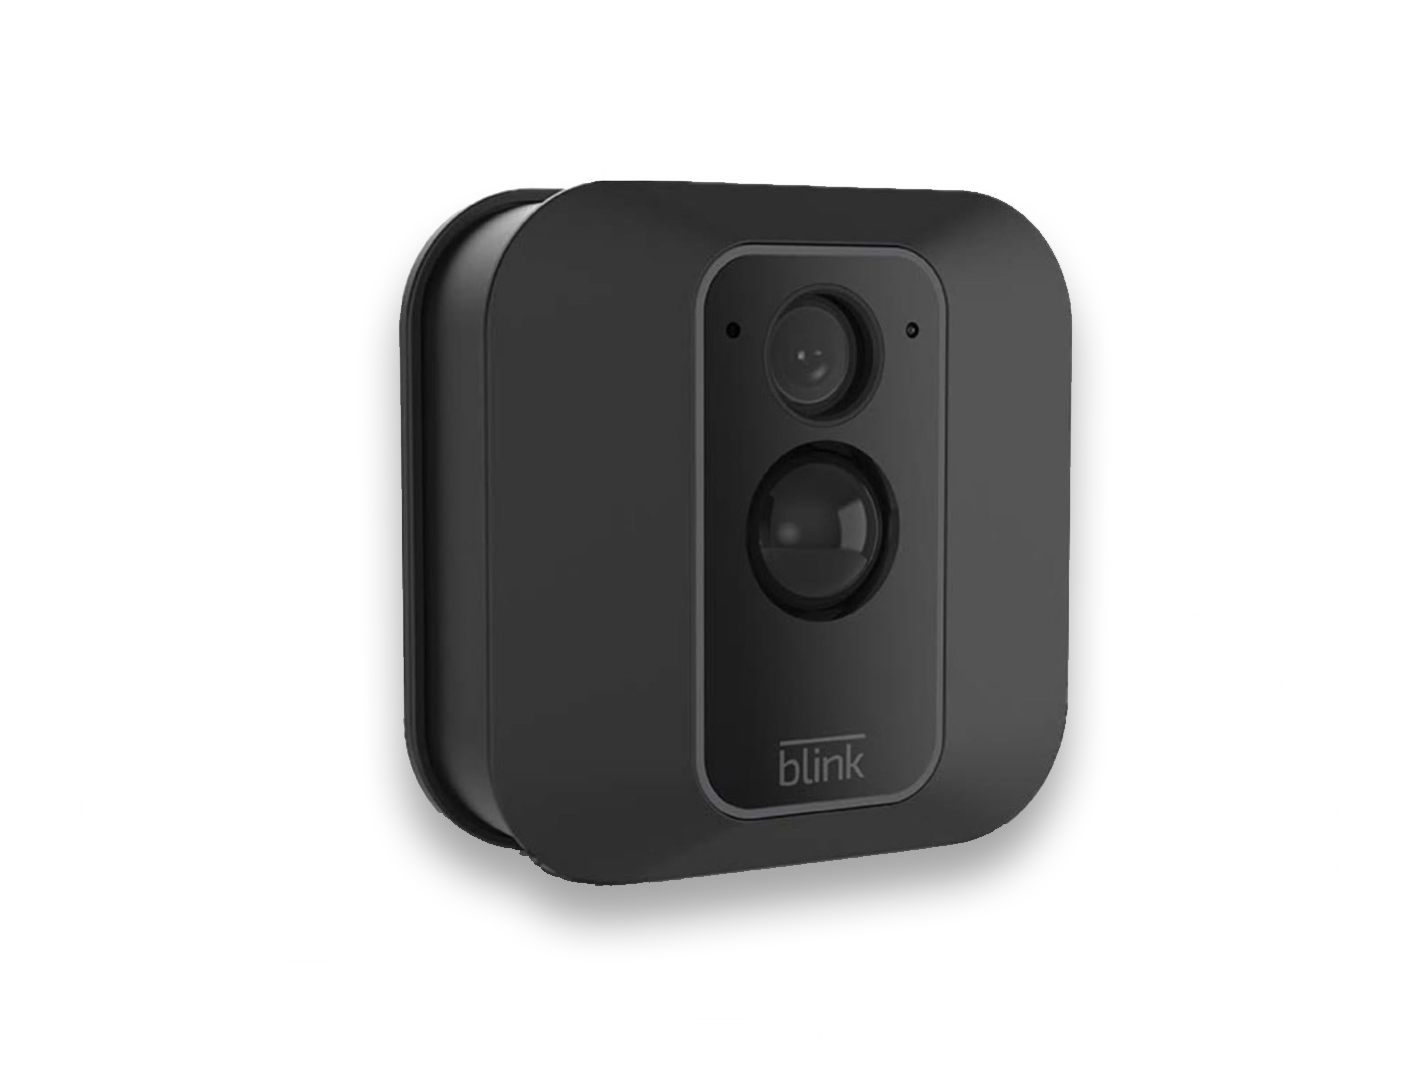 Blink home security camera